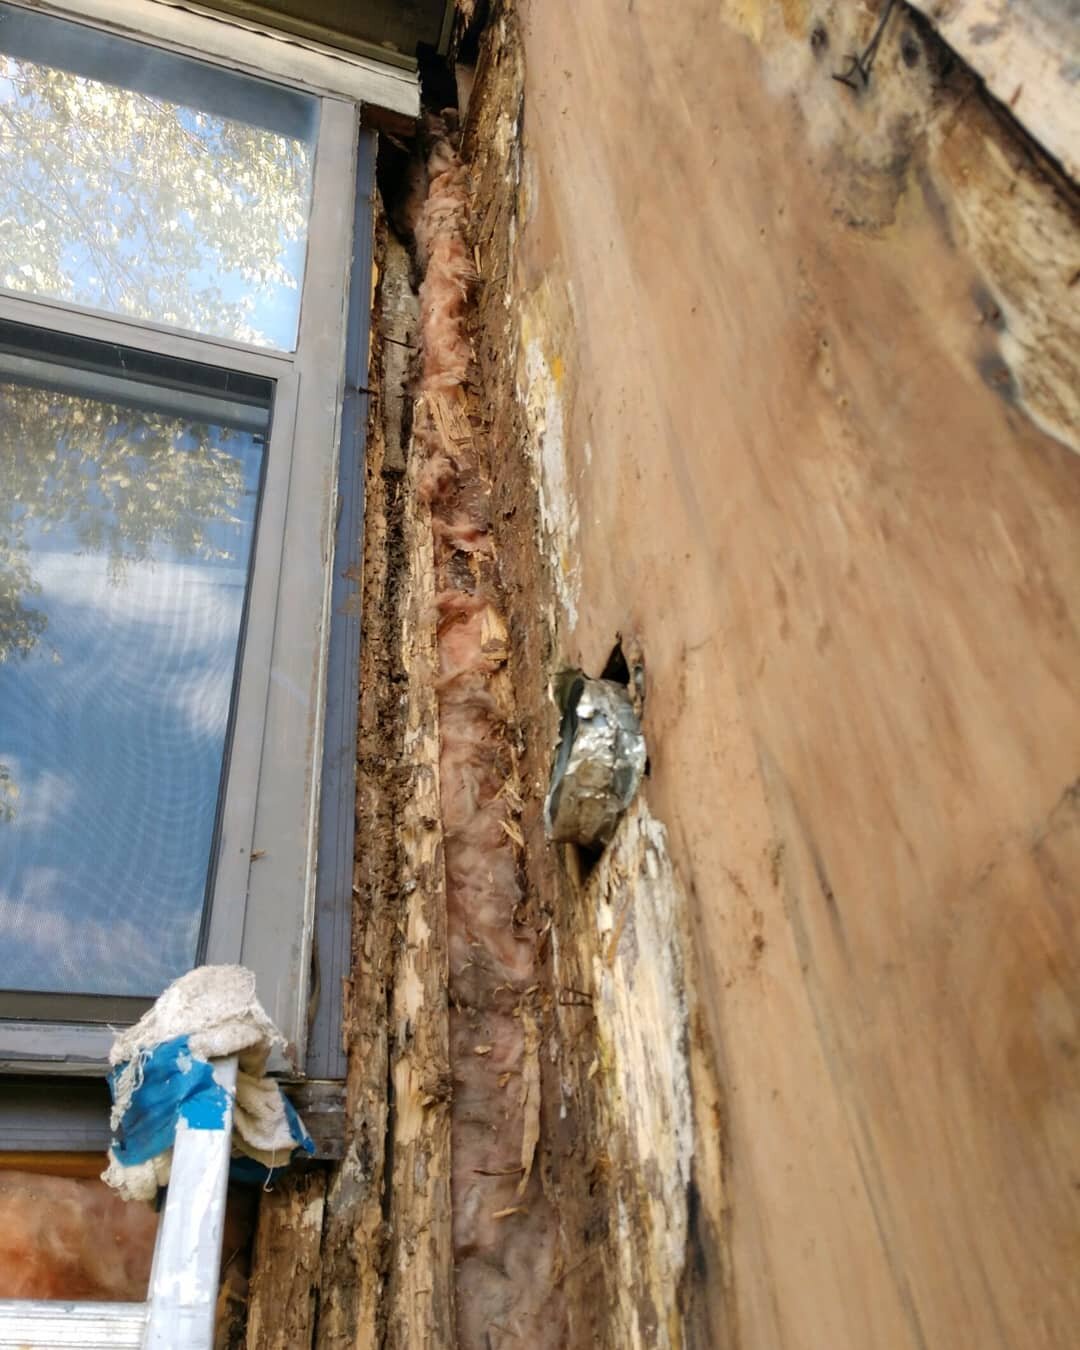 Termites are quiet destroyers. Sometimes you don't know they're in your home, until they've eaten their way to your roof.&nbsp;

#termites #calvertexterminators #exterminator #exterminators #exterminatorsofinstagram #pestcontrol #pestcontrolservice #